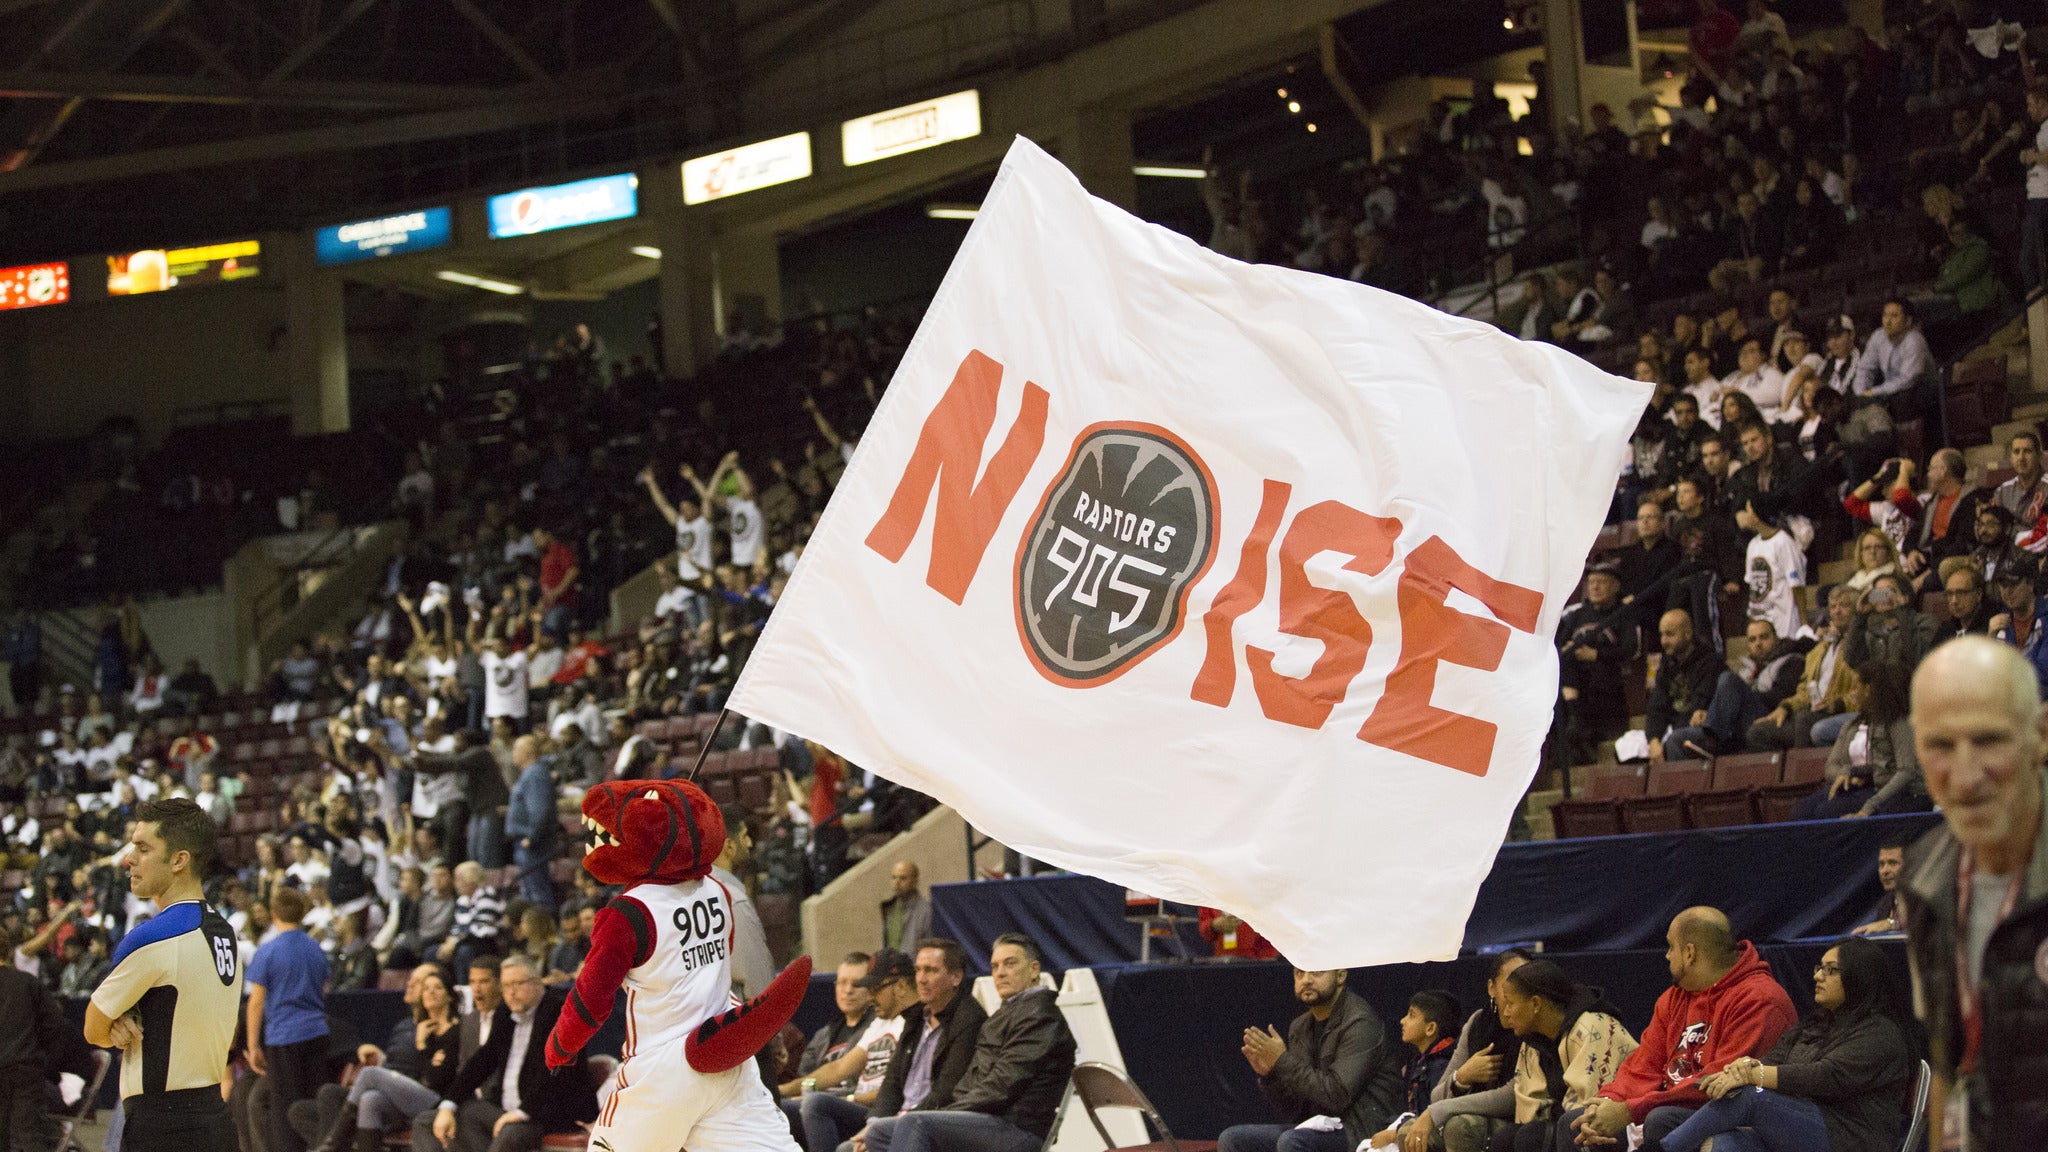 Raptors 905 Playoffs - Round 2 Home Game 1 in Mississauga promo photo for Single presale offer code